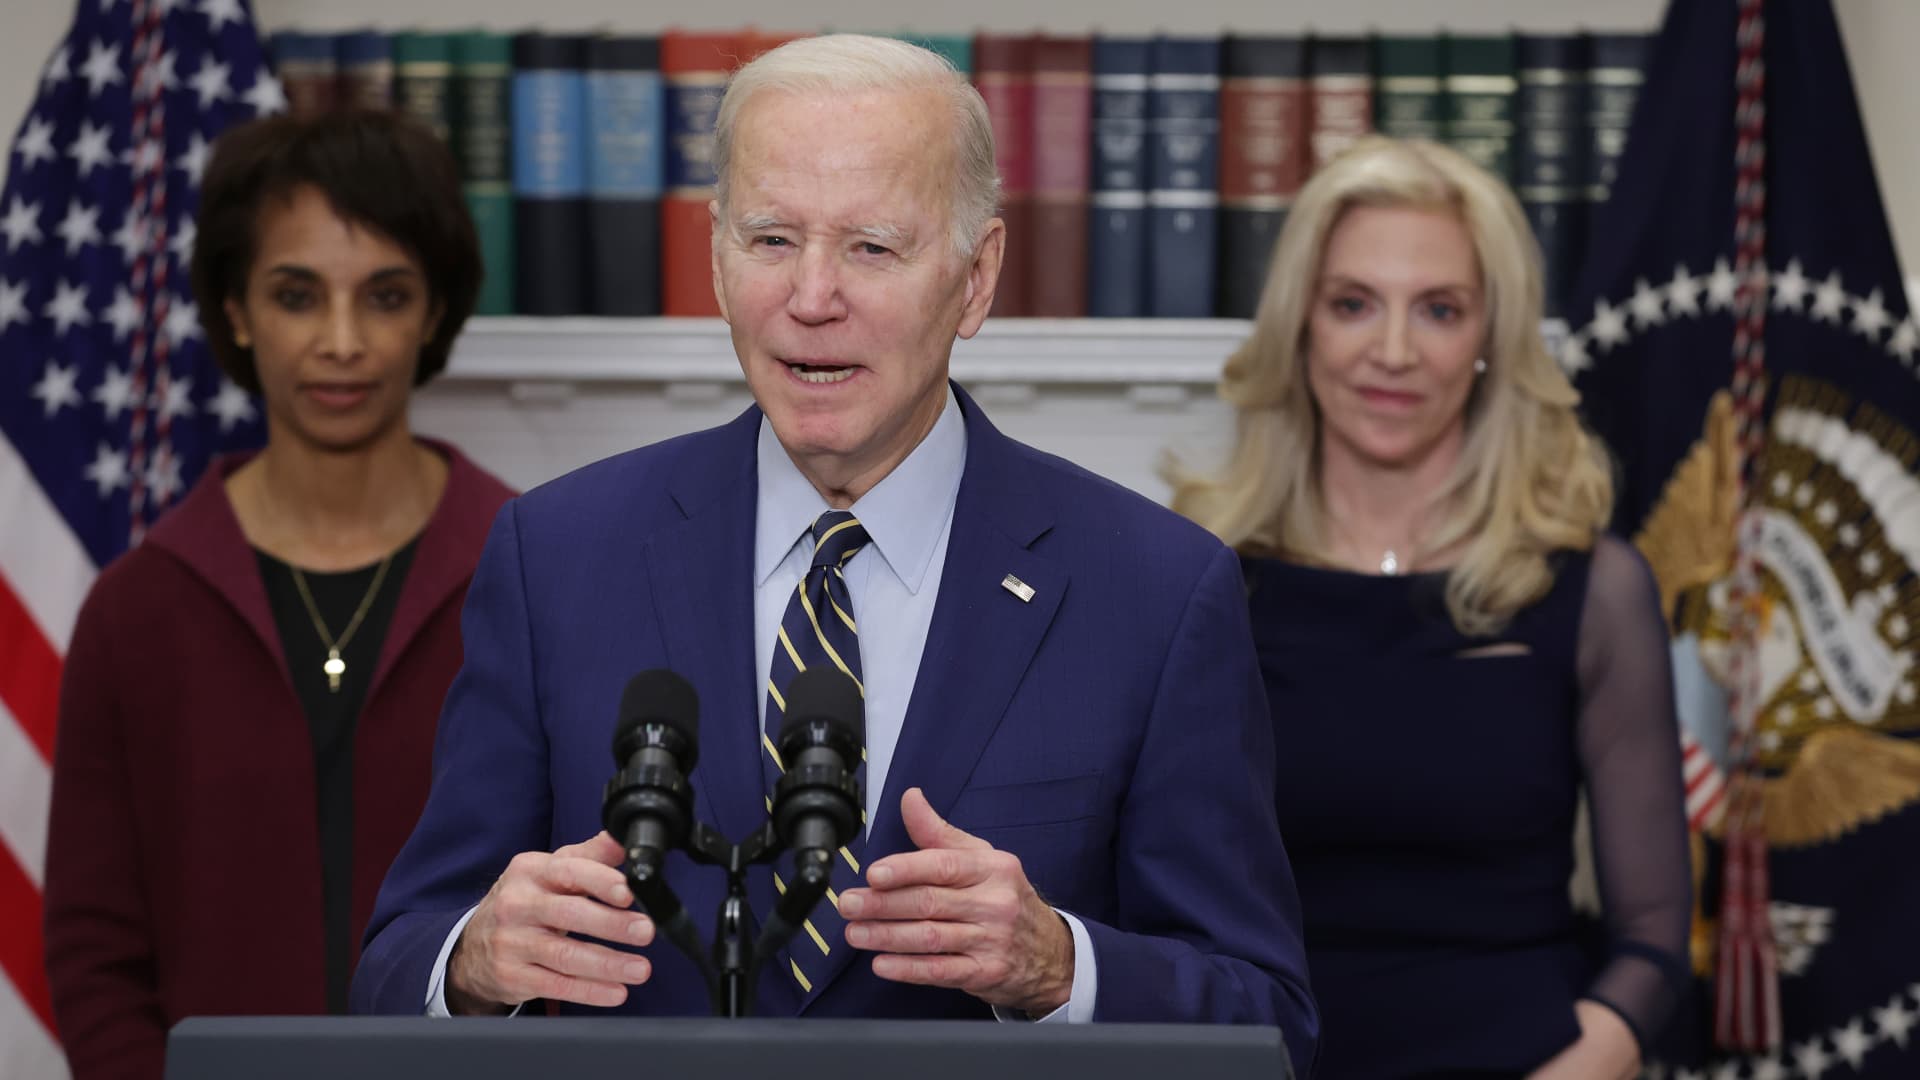 The highest revenue raising taxes in Biden’s proposed budget